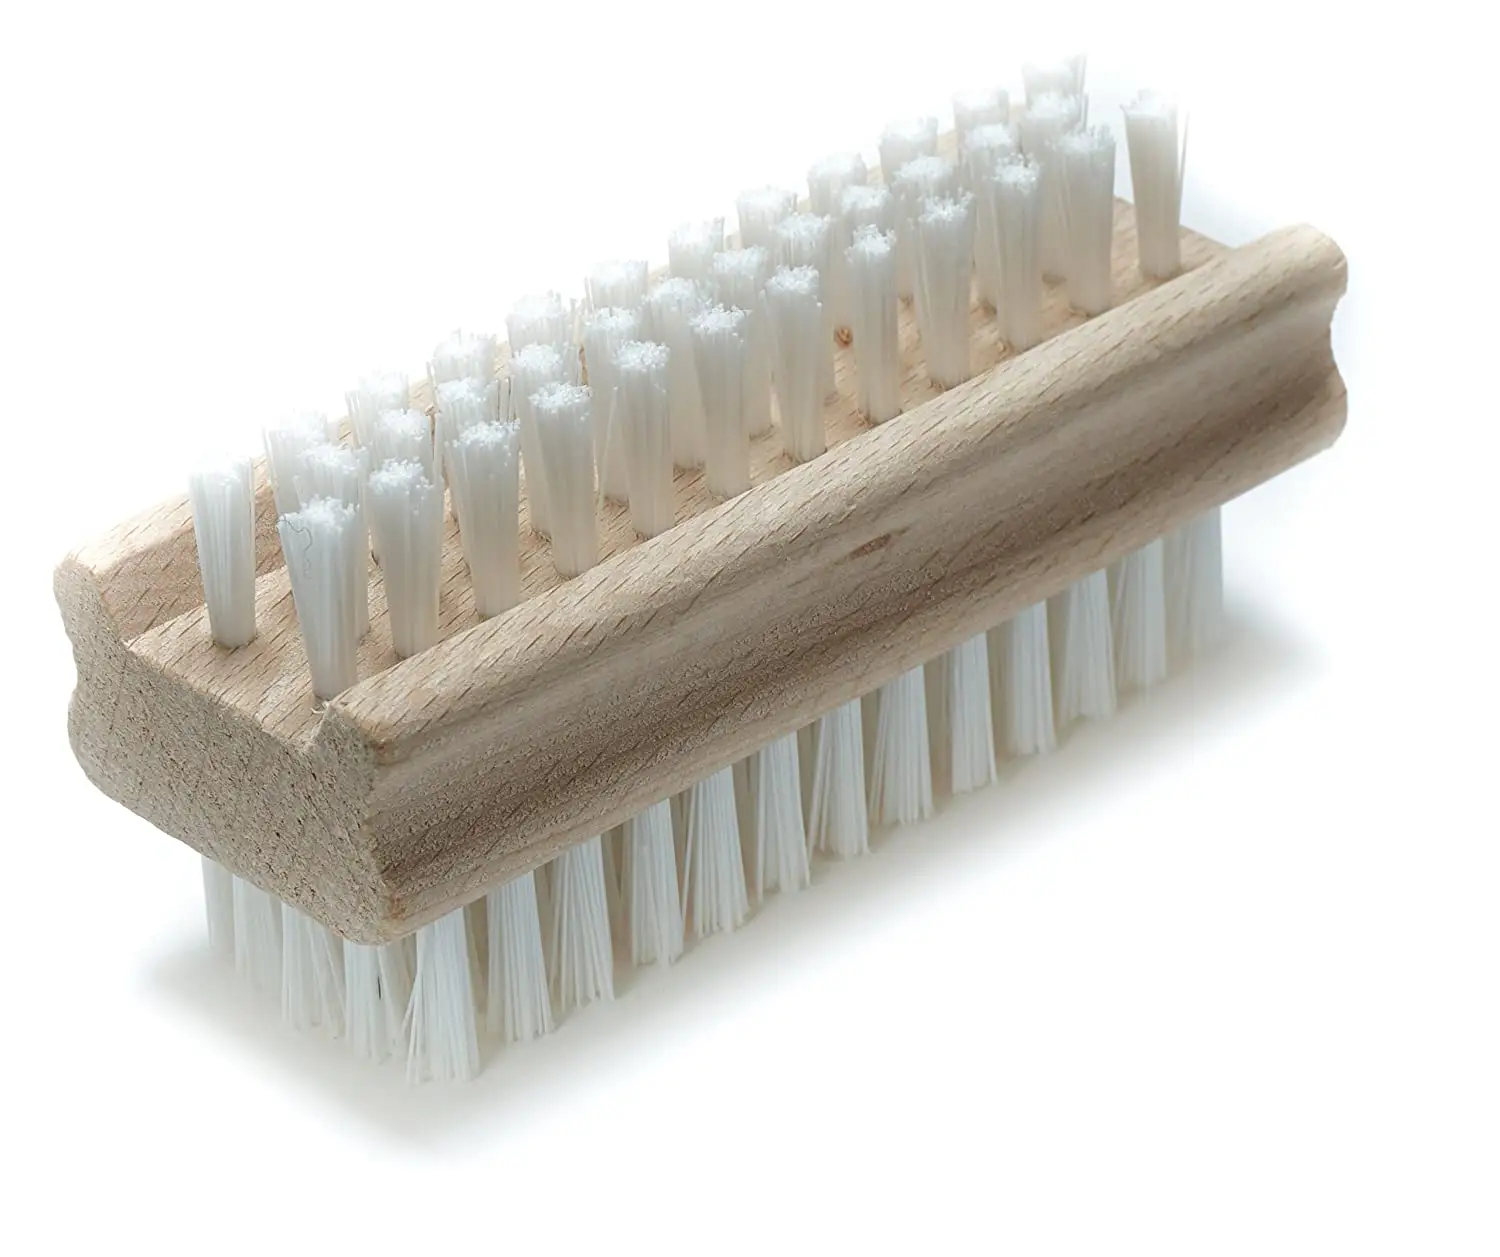 Mini Nail Scrub Brush Set in Stiff Bristles for Hand Finger Toe Hard Cleaning, Non-Slip Wooden Two-sided Hand and Nail Brush